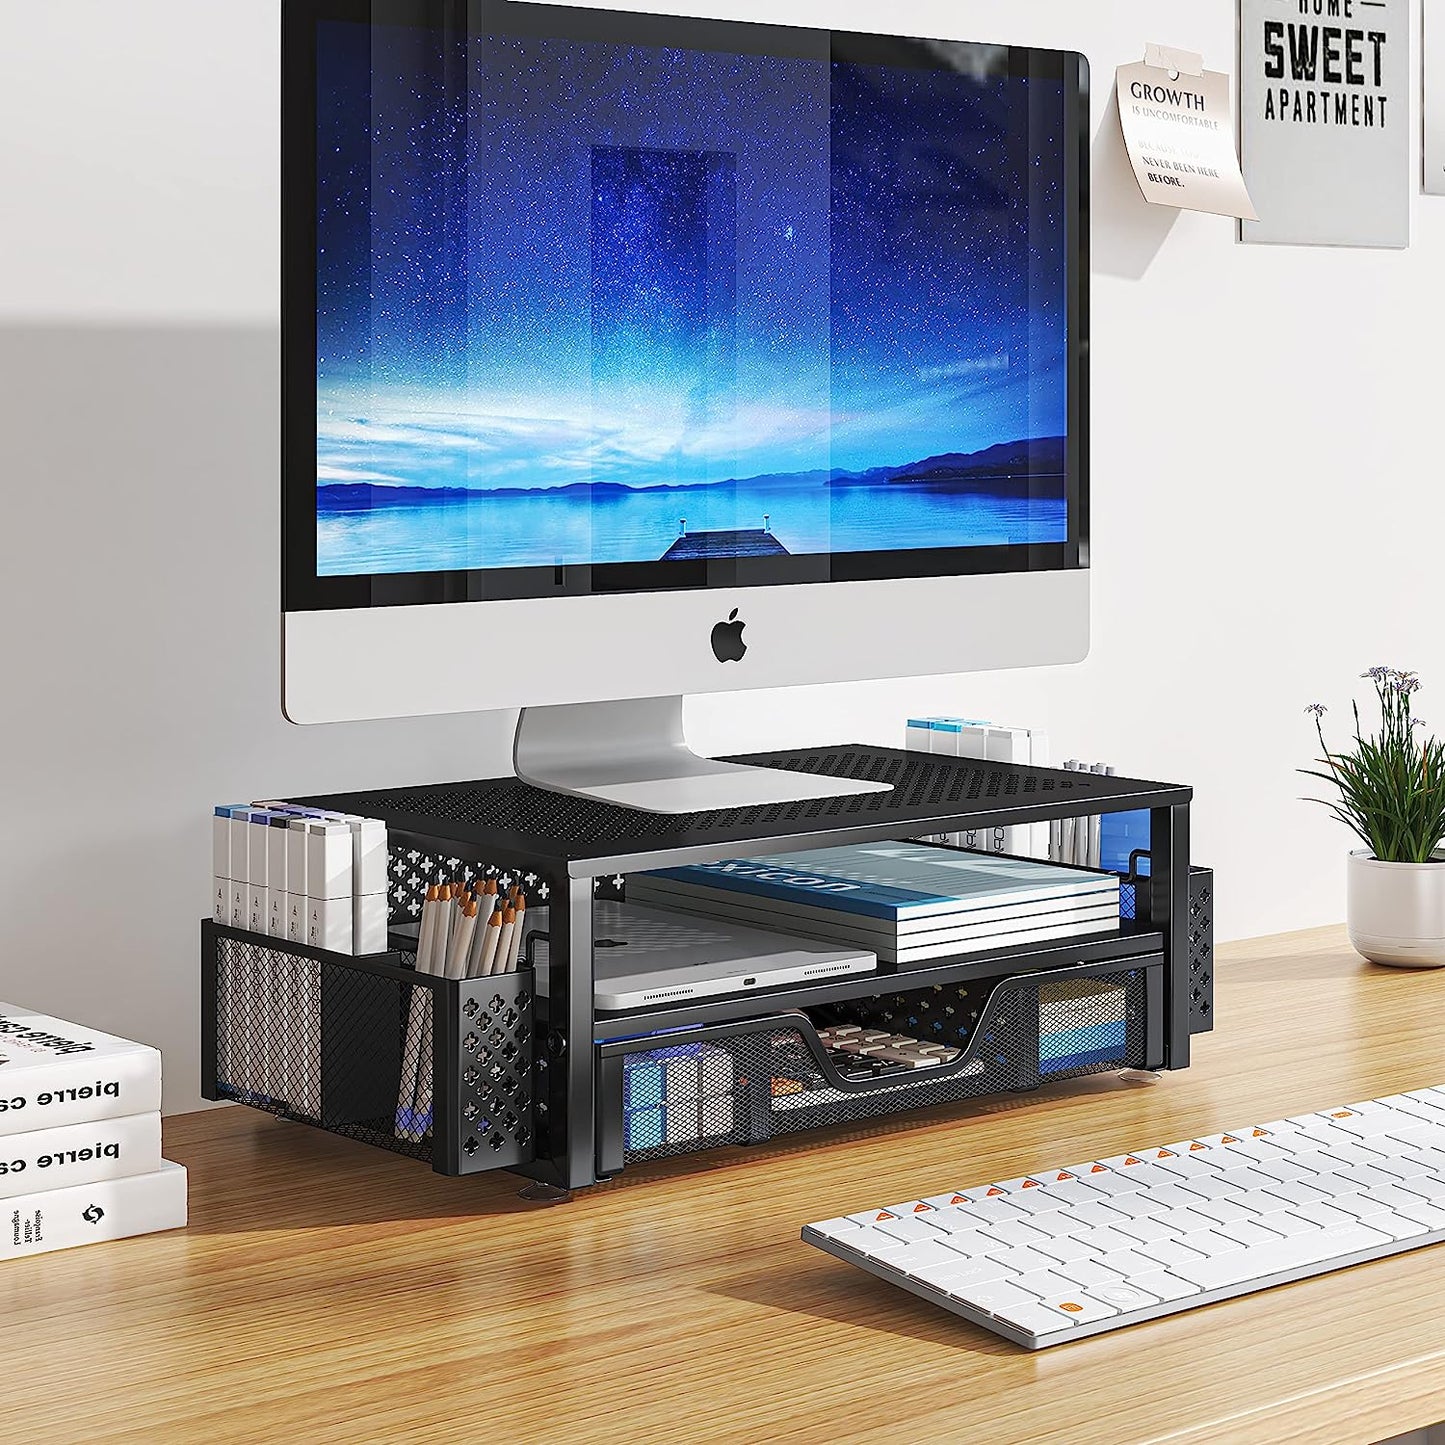 2 Tier Metal Monitor Stand Monitor Riser and Computer Desk Organizer with Drawer and Pen Holder for Laptop, Computer, Imac, Black